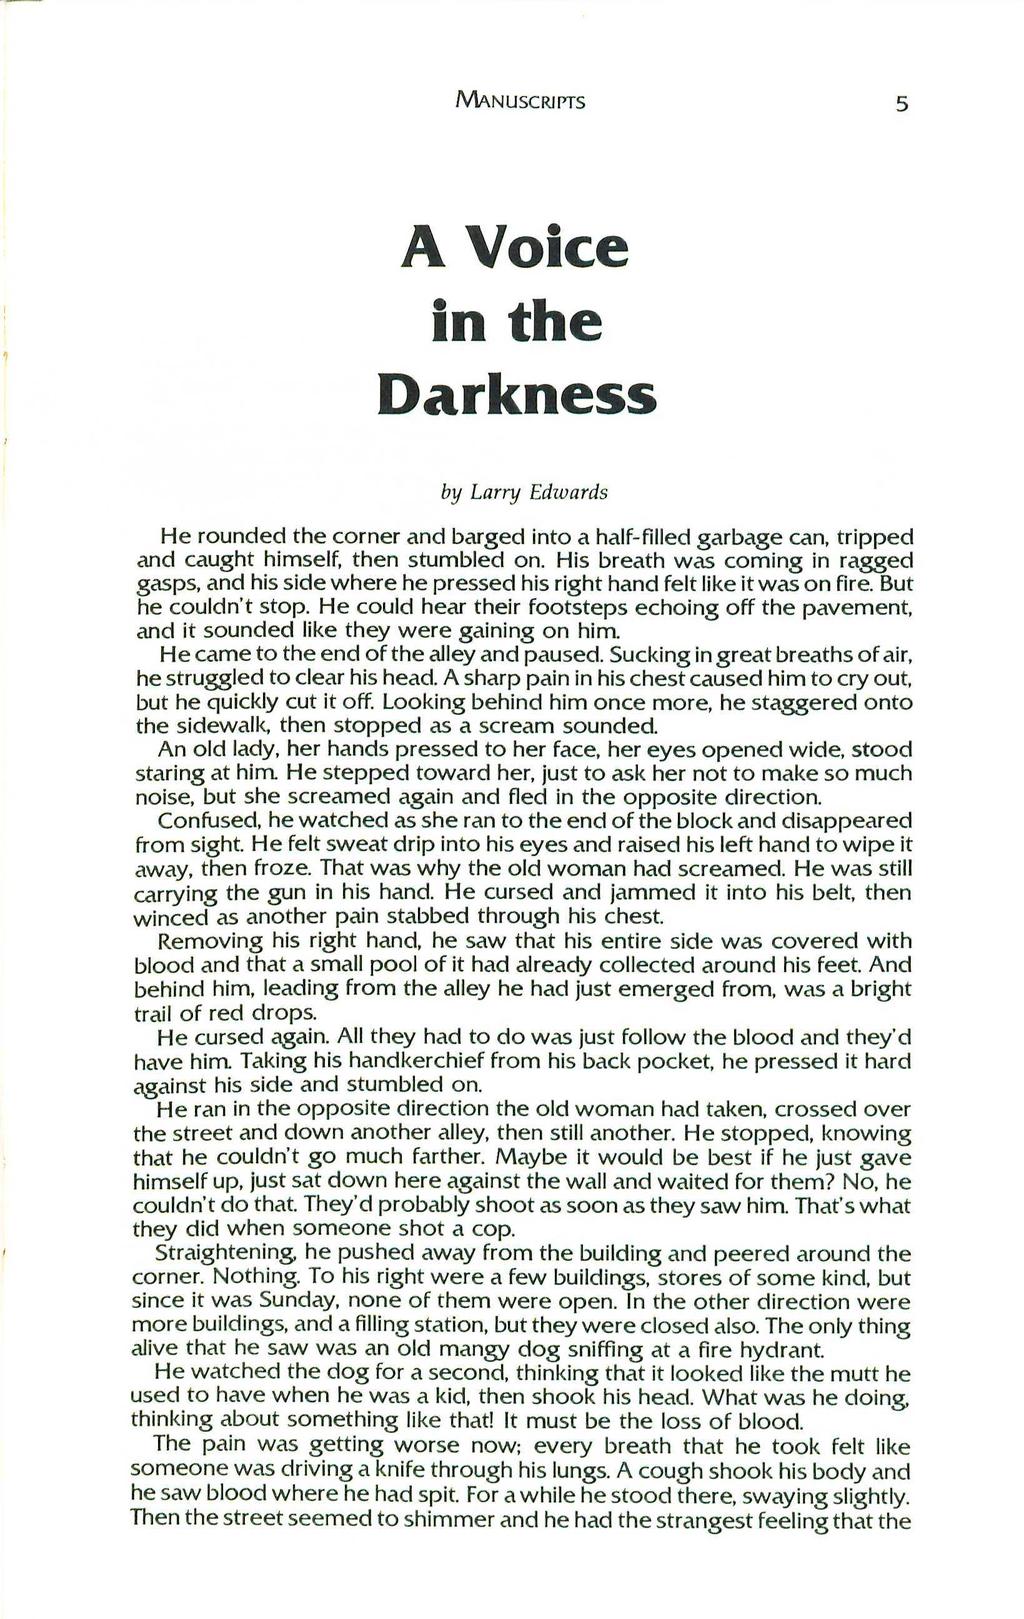 M-.NUSCRJrTS 5 A Voice in the Darkness by Larry Edwards He rounded the corner and barged into a half-filled garbage can, tripped and caught himself, then stumbled on.